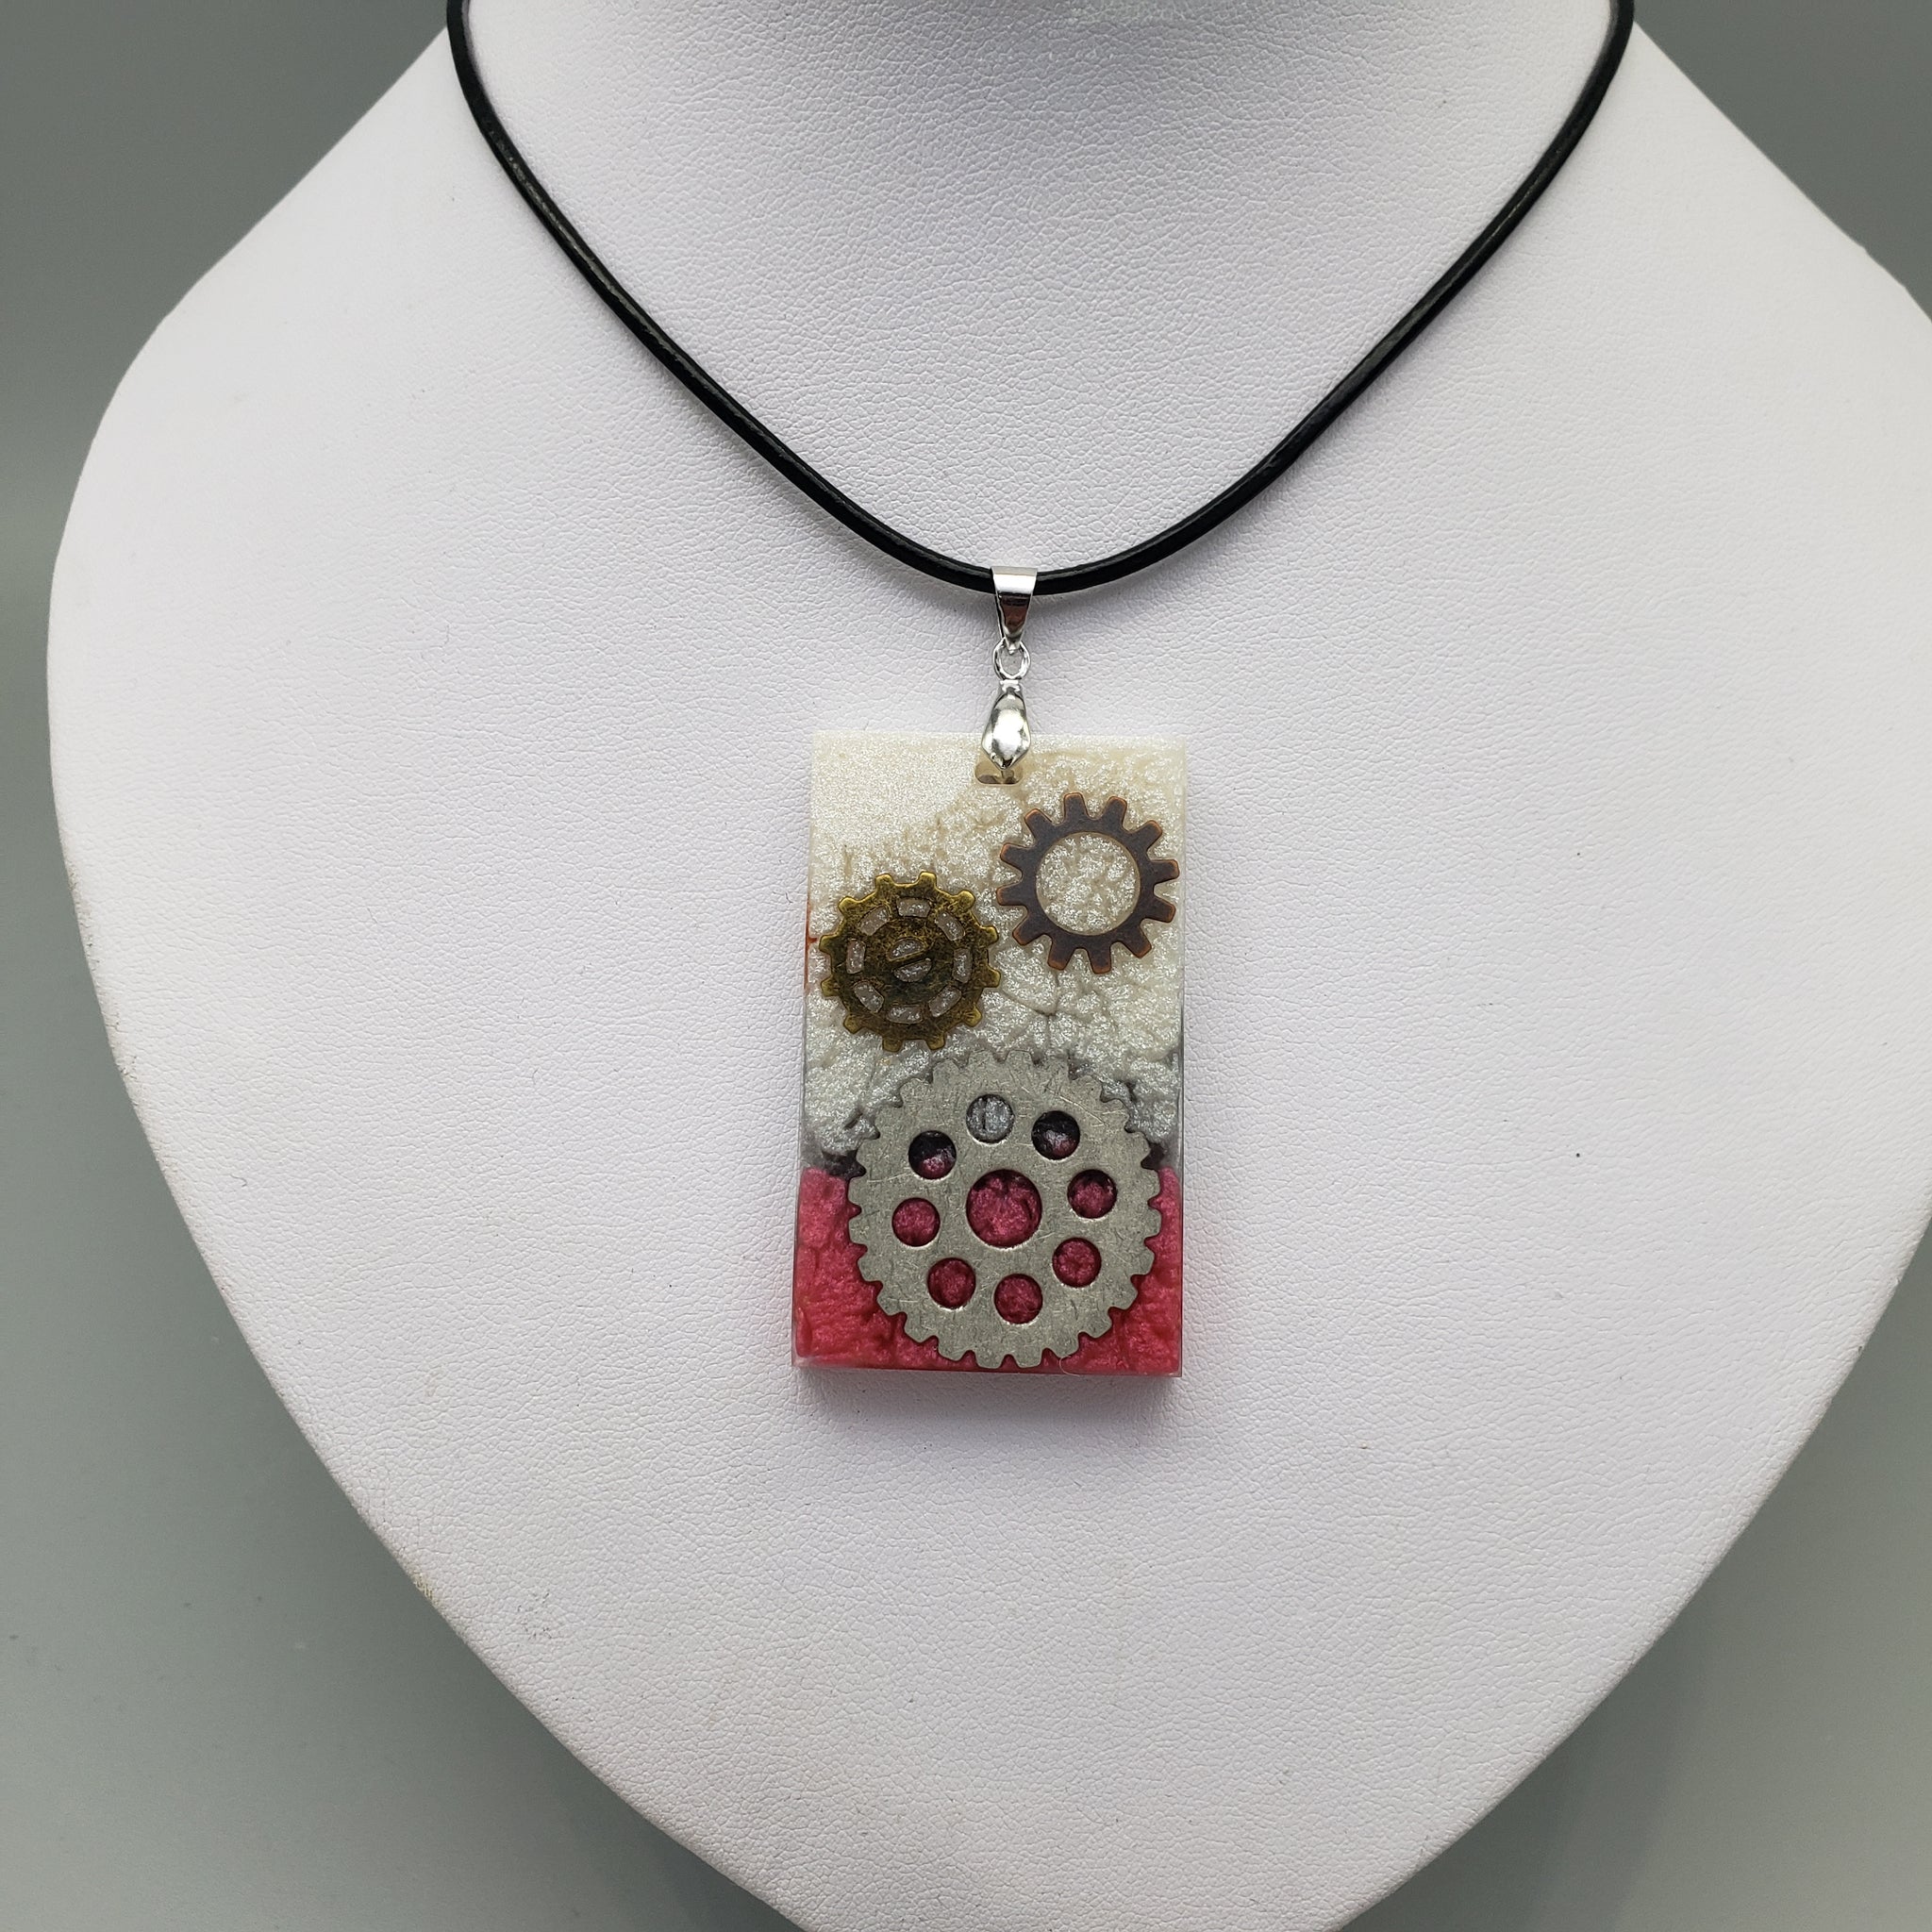 Pendant red and white gears